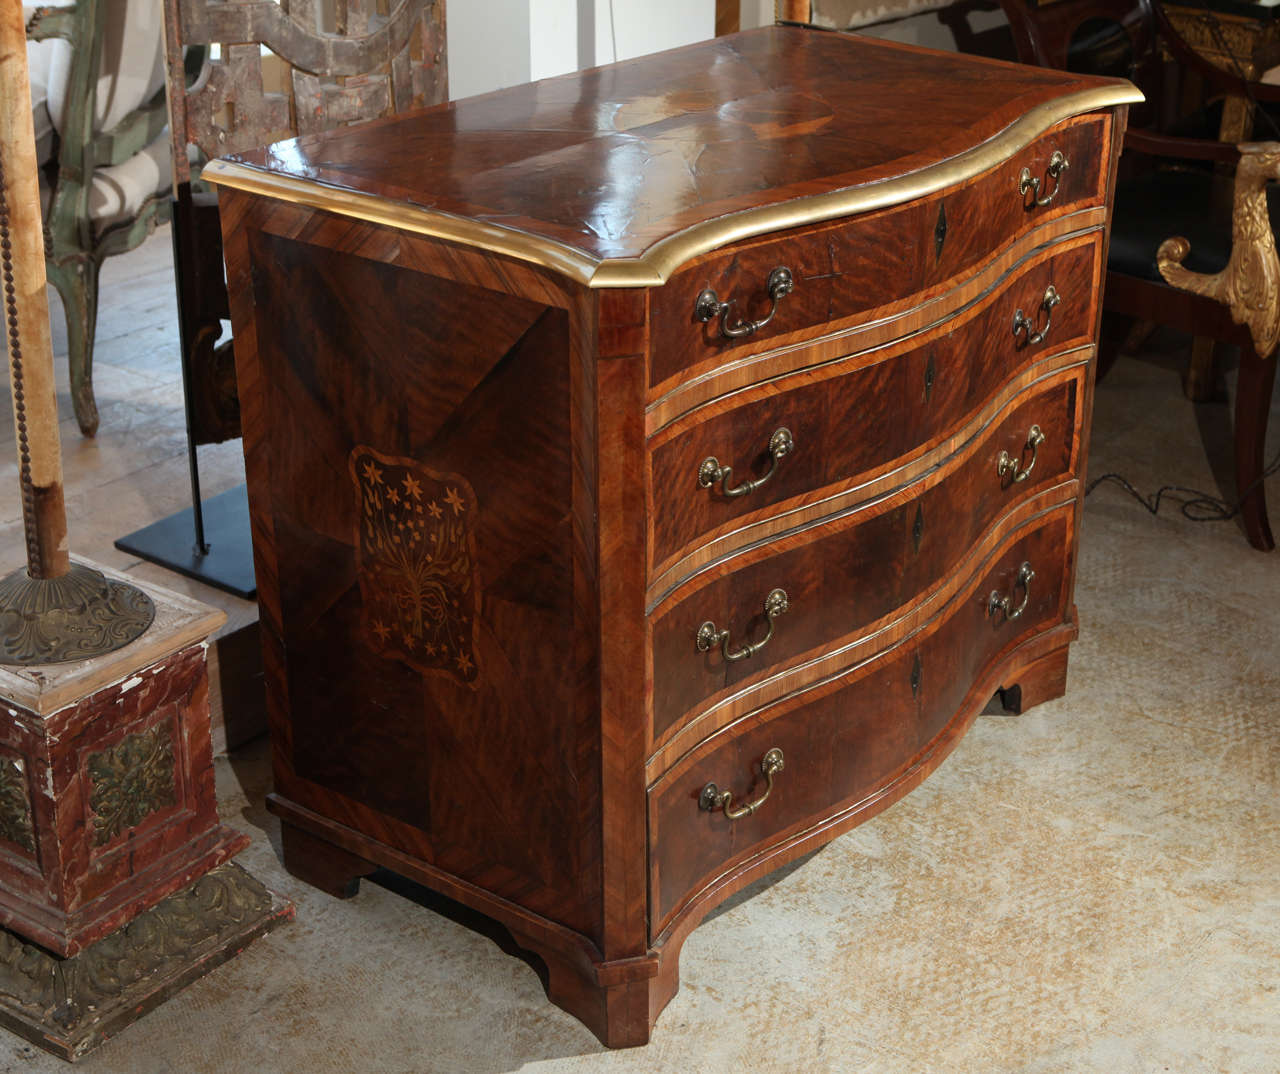 A petite, four-drawer, cross-banded, bow-front, clipped corner commode, with a gilt brass railing. The top features a charming marquetry medallion of a parrot perched on a branch. The sides are embellished with inlaid images of tied bouquets.